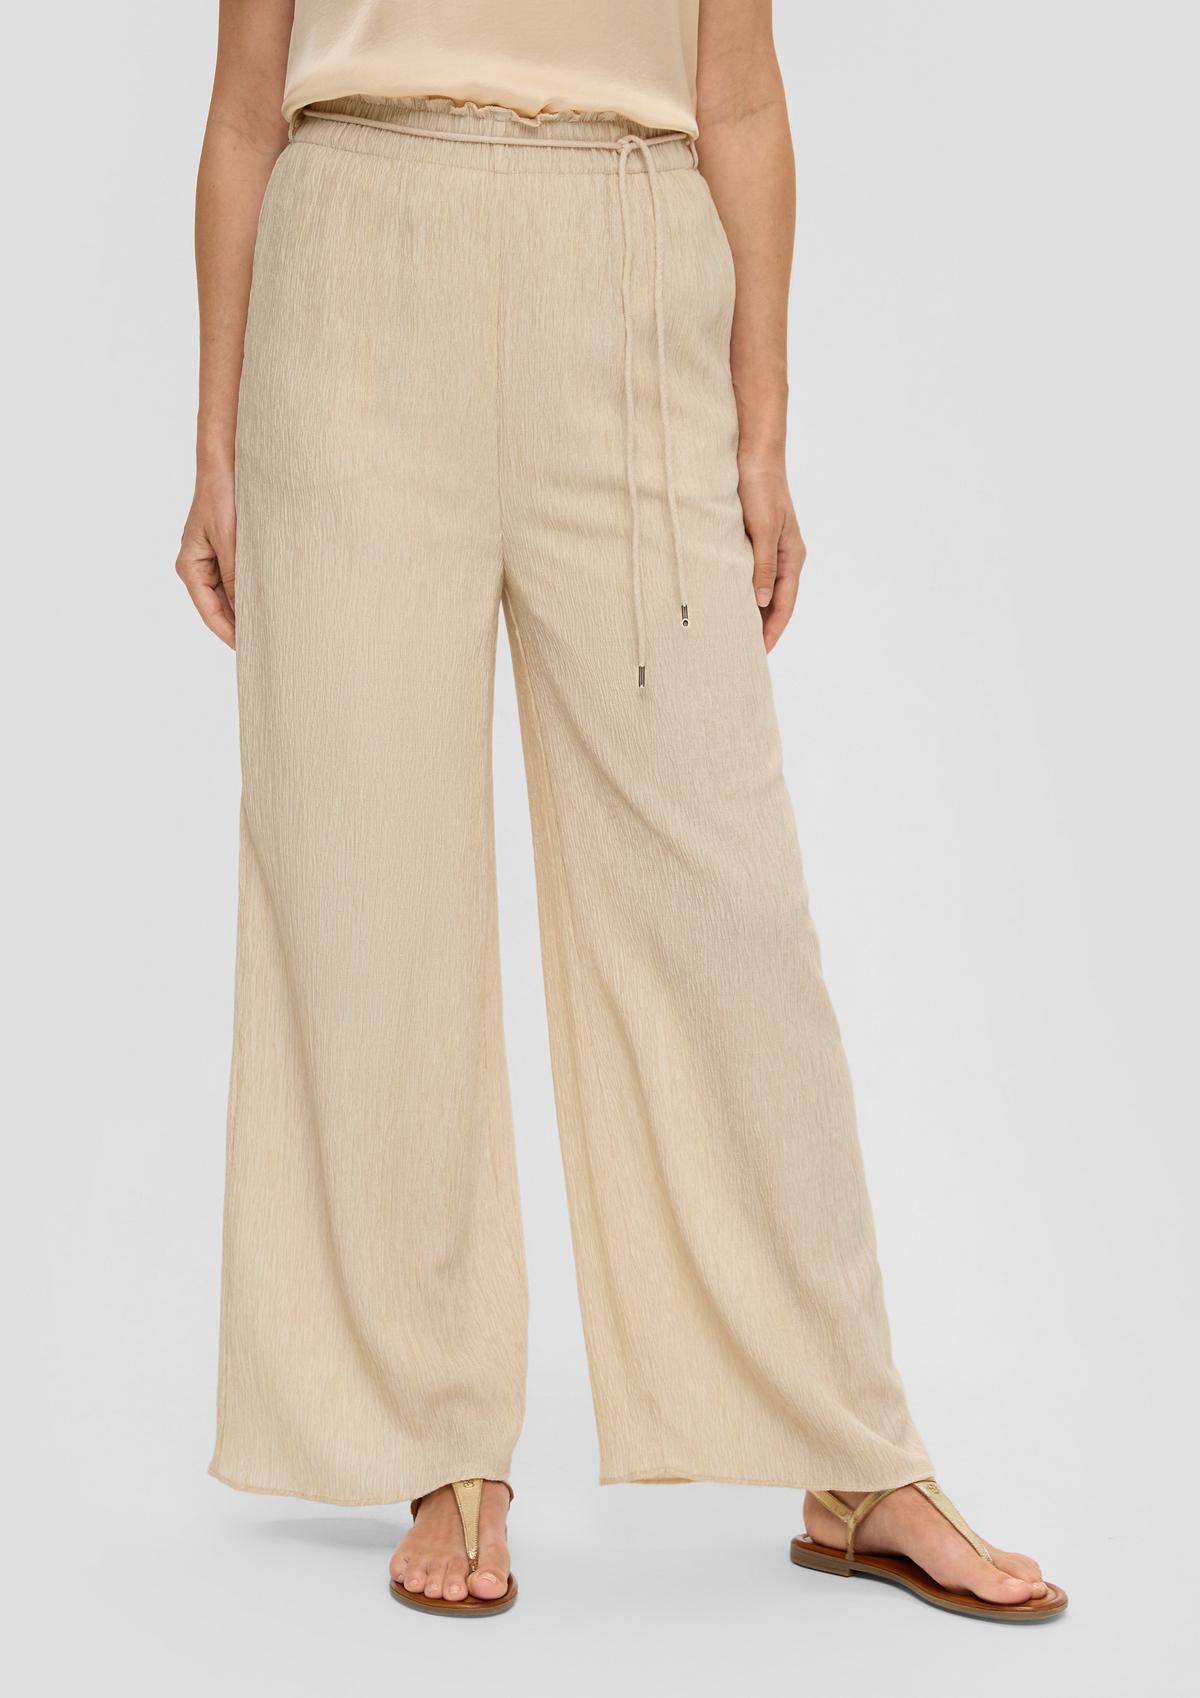 s.Oliver Trousers with a crinkle texture and slit pockets